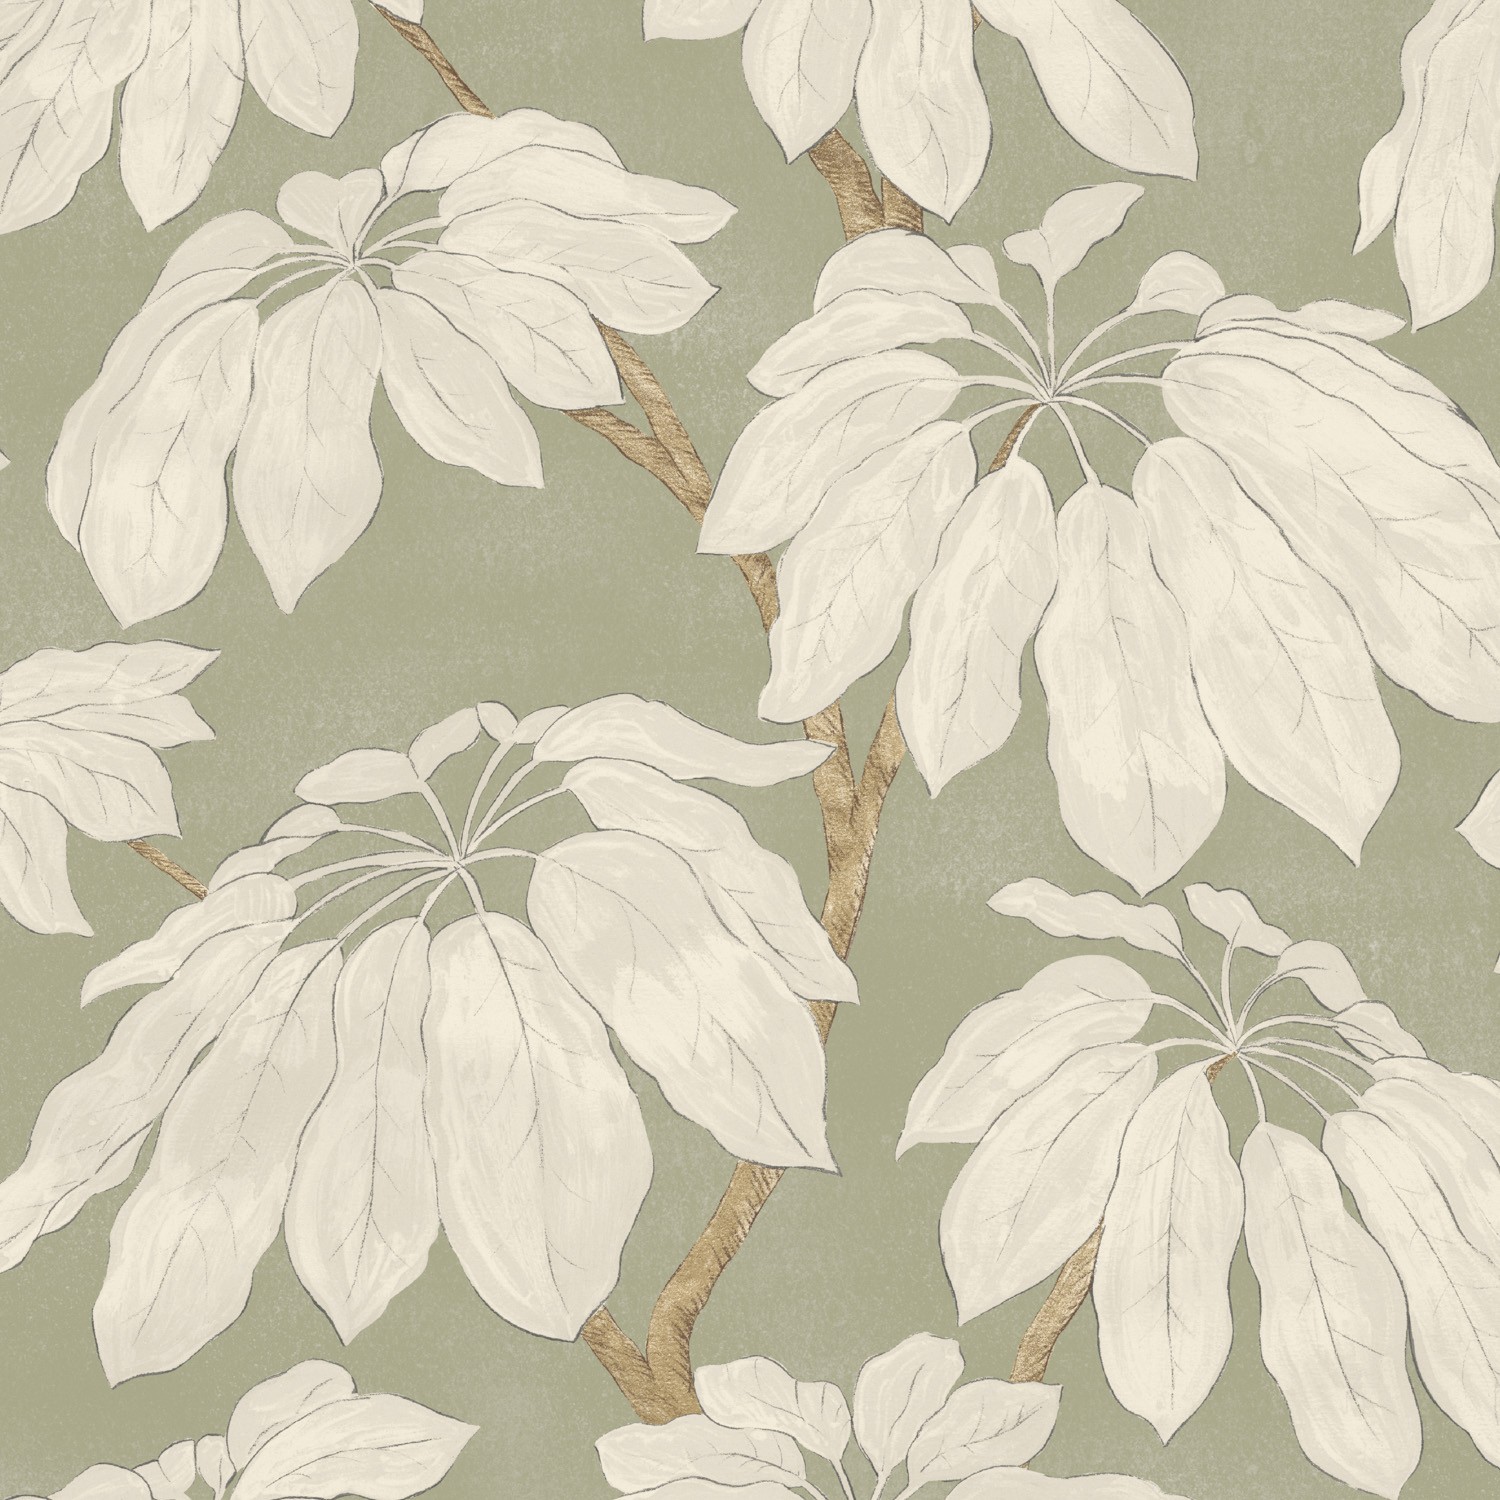 Delicate Stems Wallpaper in Shades of Cream on Seafoam Green  Lucie Annabel